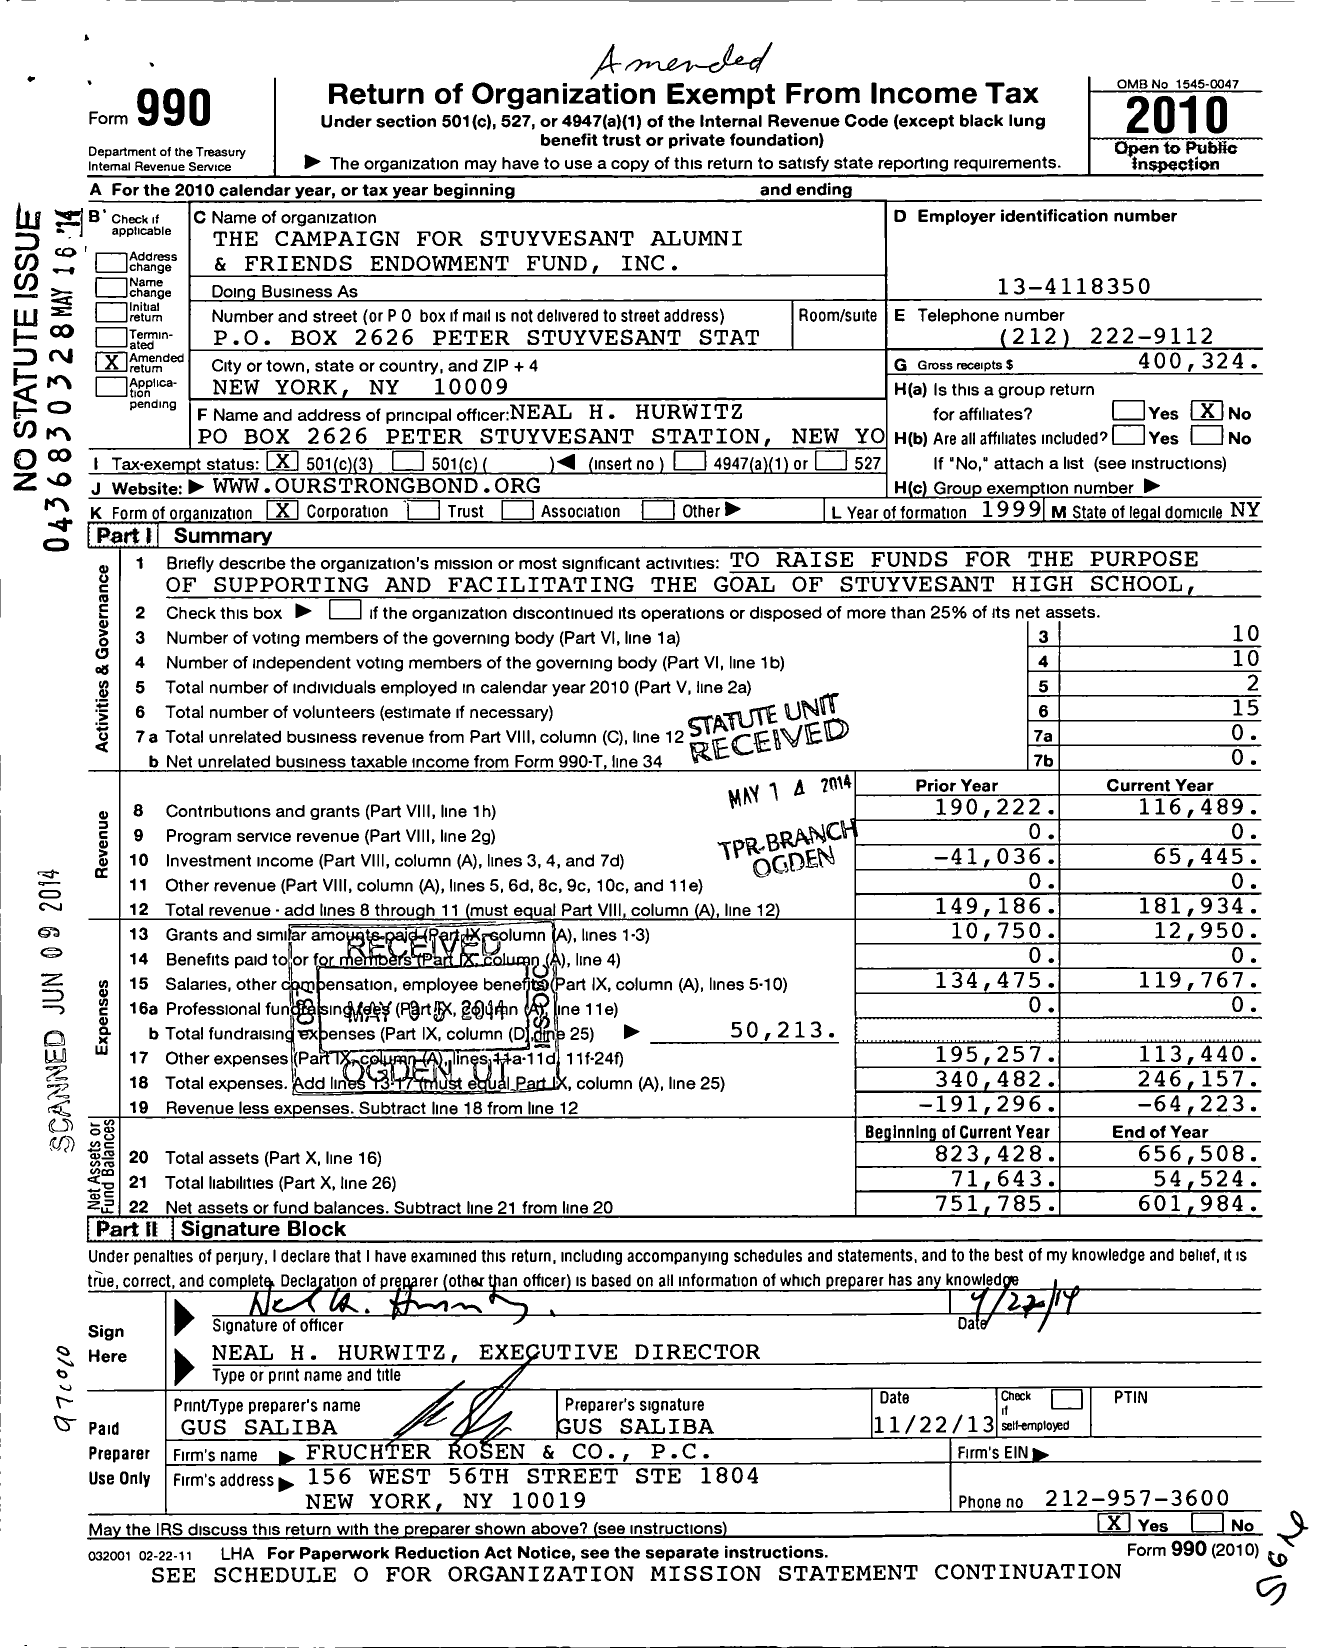 Image of first page of 2010 Form 990 for The Campaign For Stuyvesant Alumni and Friends Endowment Fund